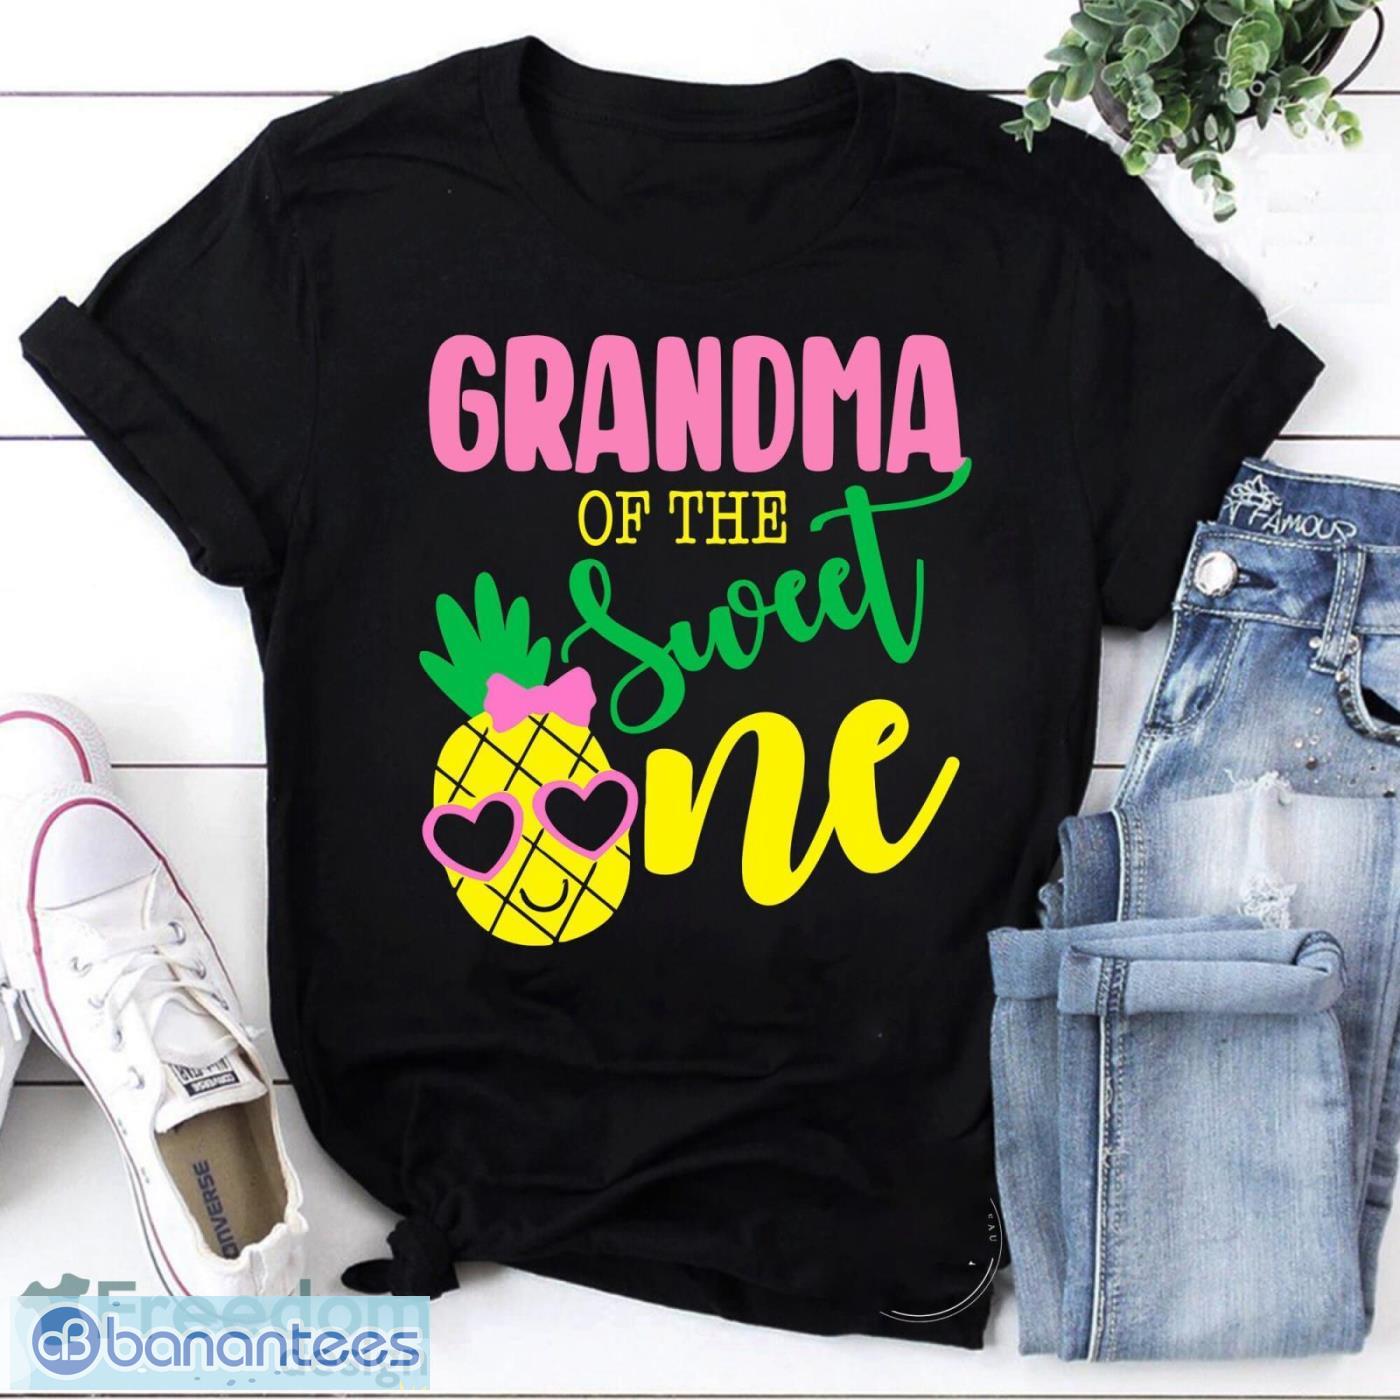 Grandma Of The Sweet One Vintage T-Shirt Sweet Pineapple Shirt Sweeat Grandama Shirt For Mother's Day Shirt Product Photo 1